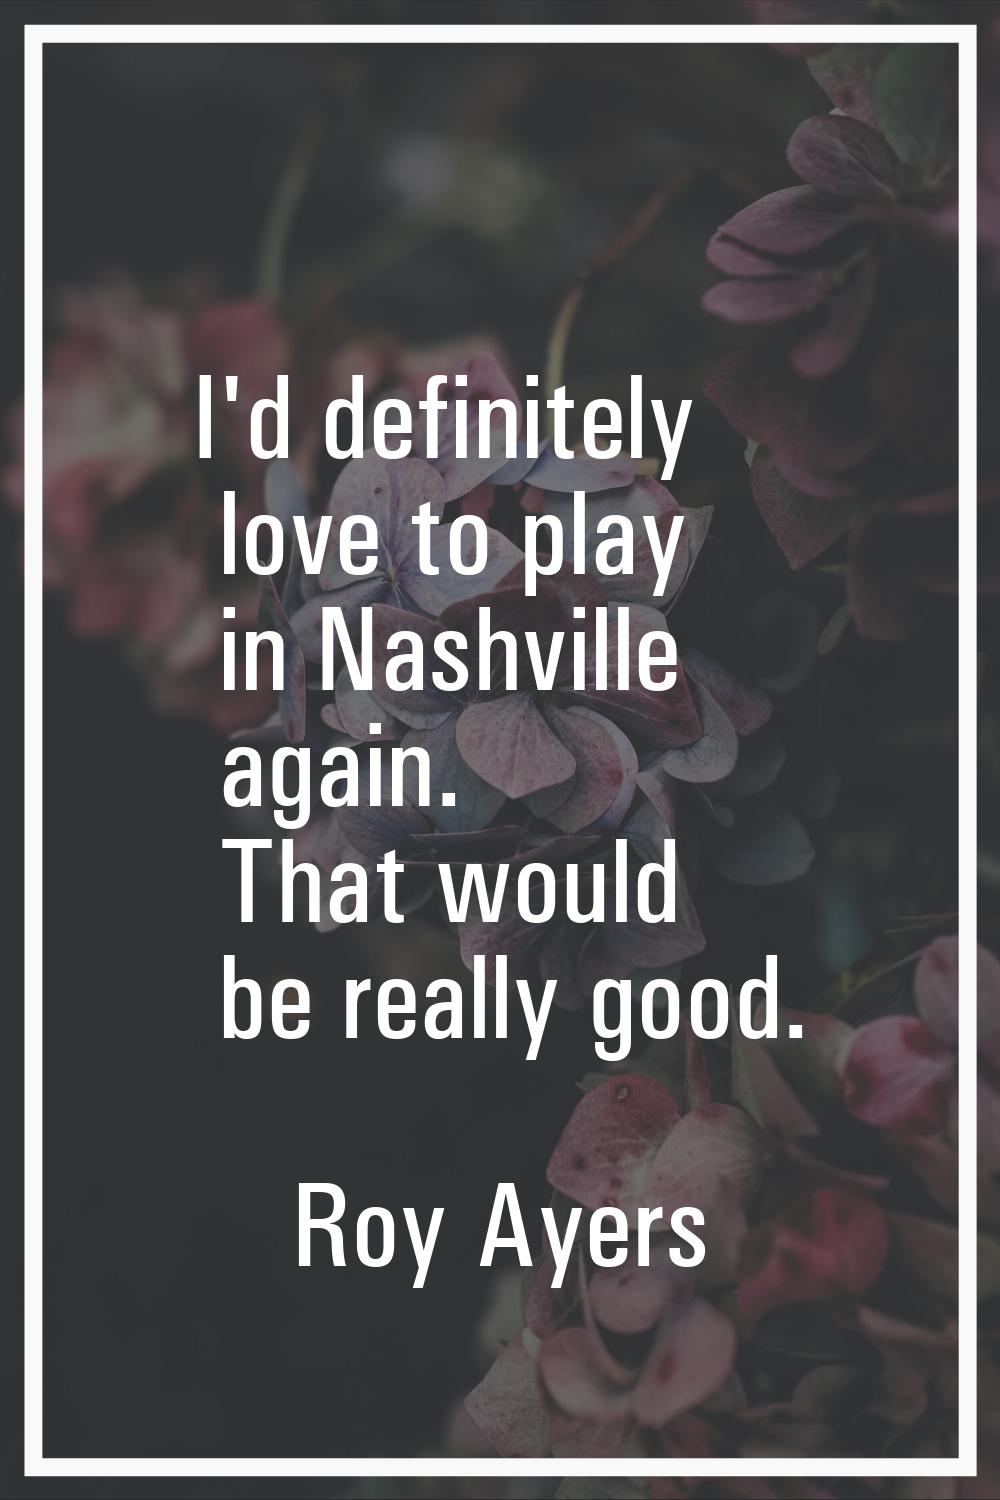 I'd definitely love to play in Nashville again. That would be really good.